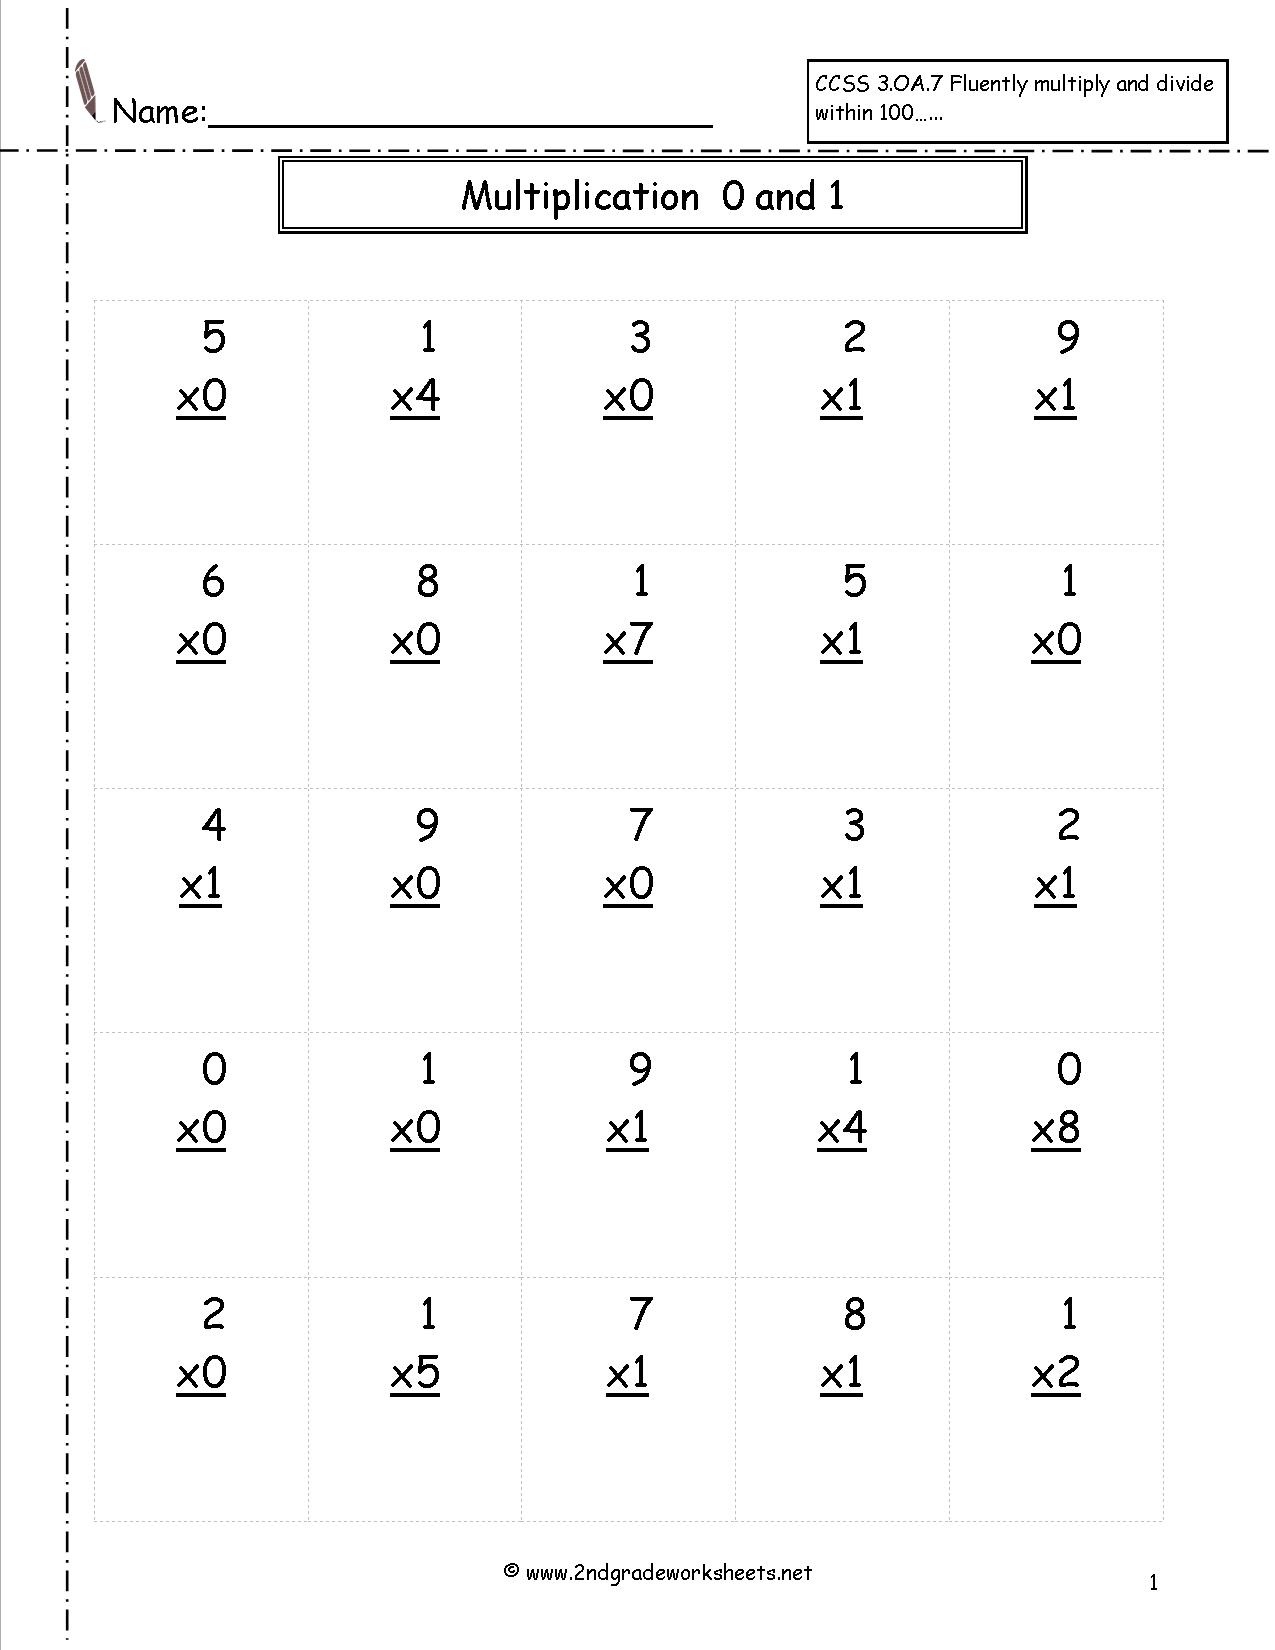 Multiplication Worksheets And Printouts - Free Printable Multiplication Worksheets For 4Th Grade